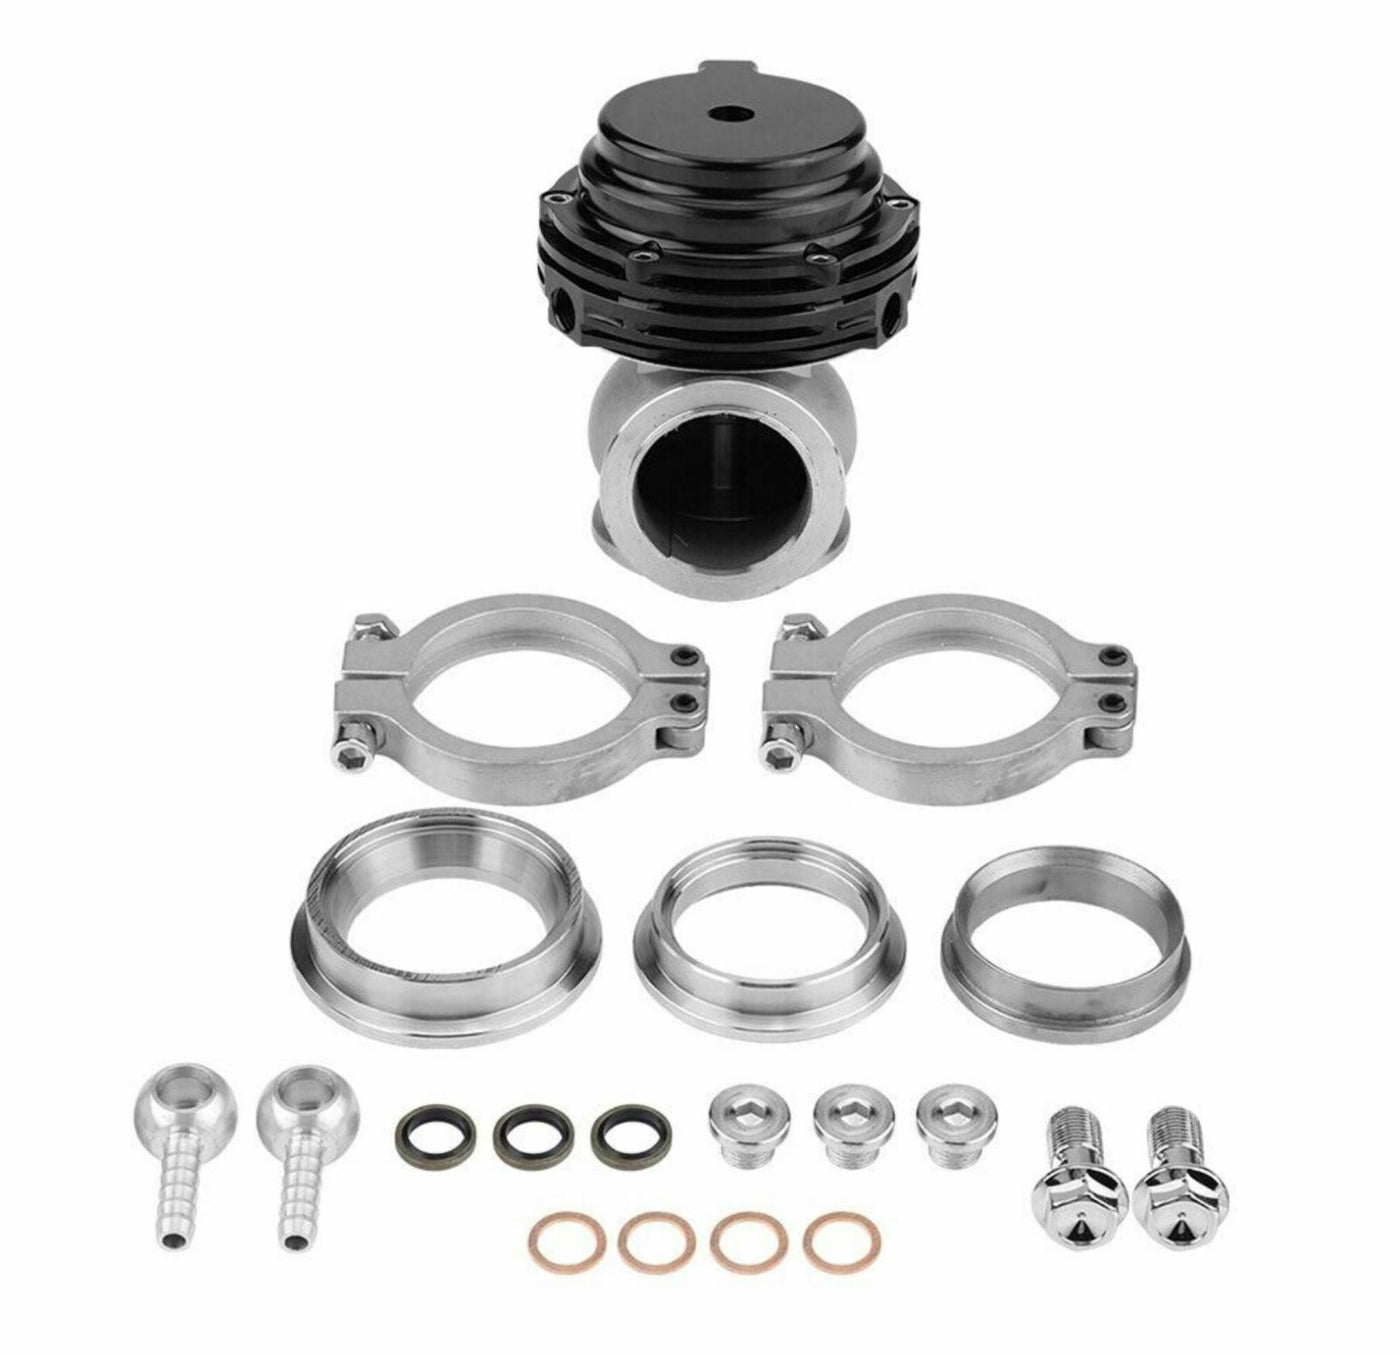 For Tial 44mm External Wastegate MVR V-Band Flange Turbo USA 2-3 Day Delivery